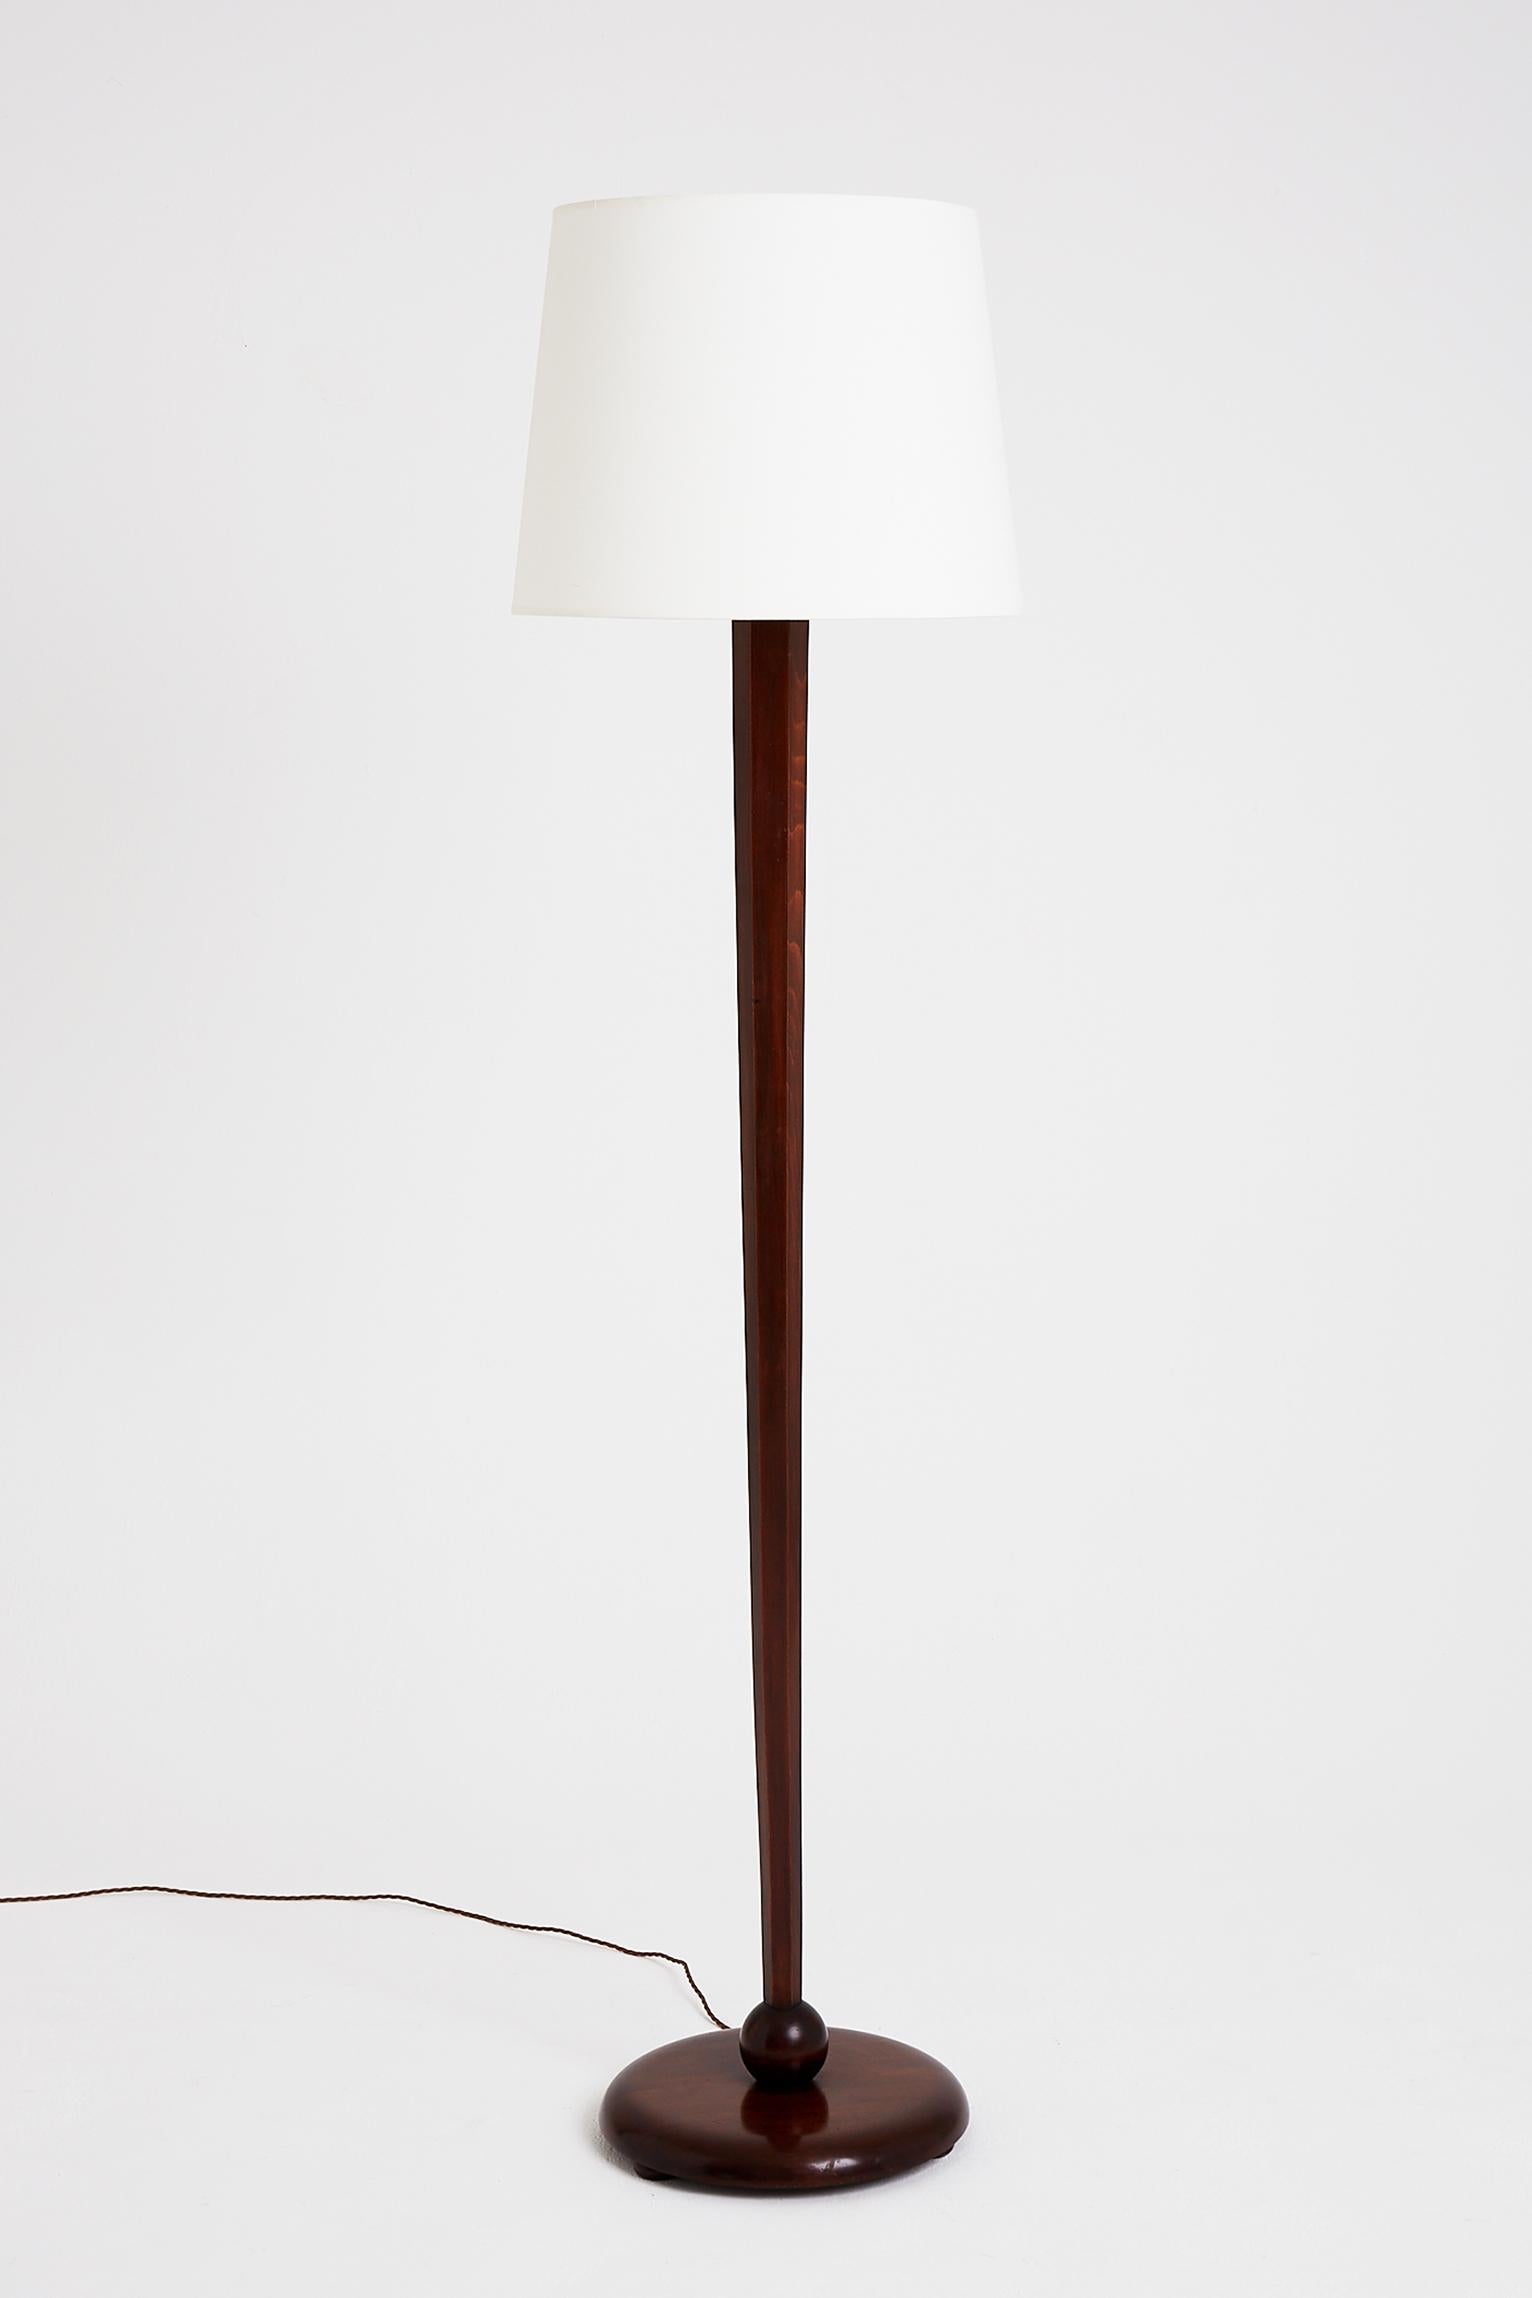 An Art Deco stained oak tall floor lamp.
France, circa 1930.
With the shade: 194 cm tall by 50 cm diameter.
Lamp only: 165 cm tall by 38 cm diameter.